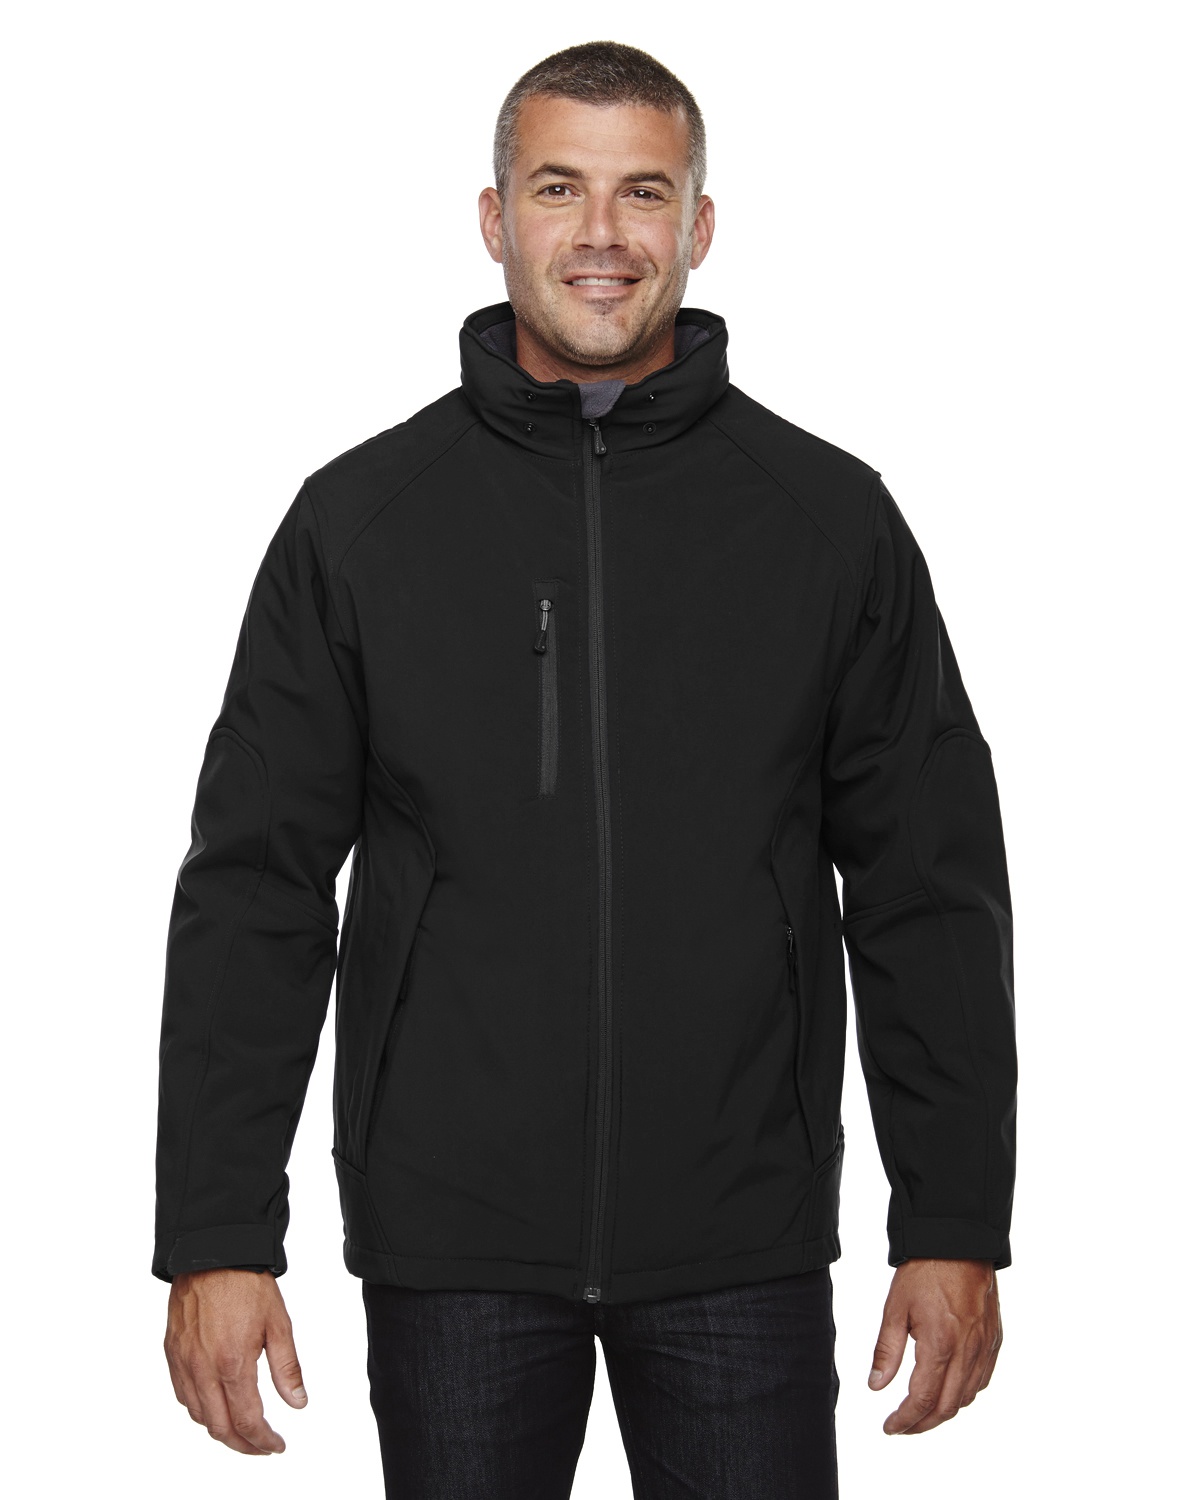 Black 703 Small North End Mens Soft Shell Technical Jacket